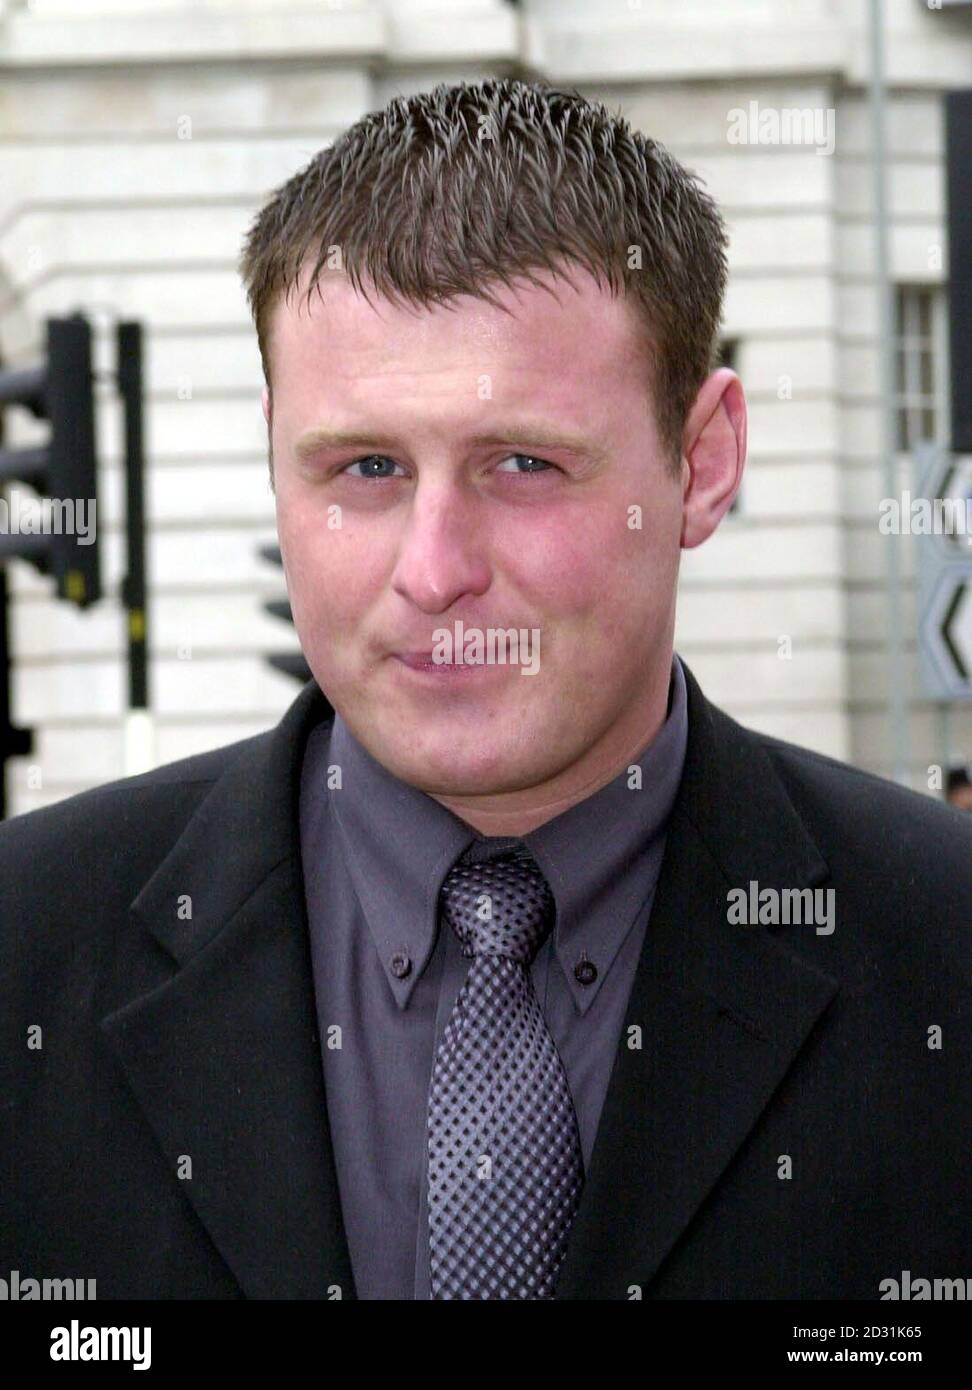 Paul clifford arriving back at hull crown court after lunch hi-res ...